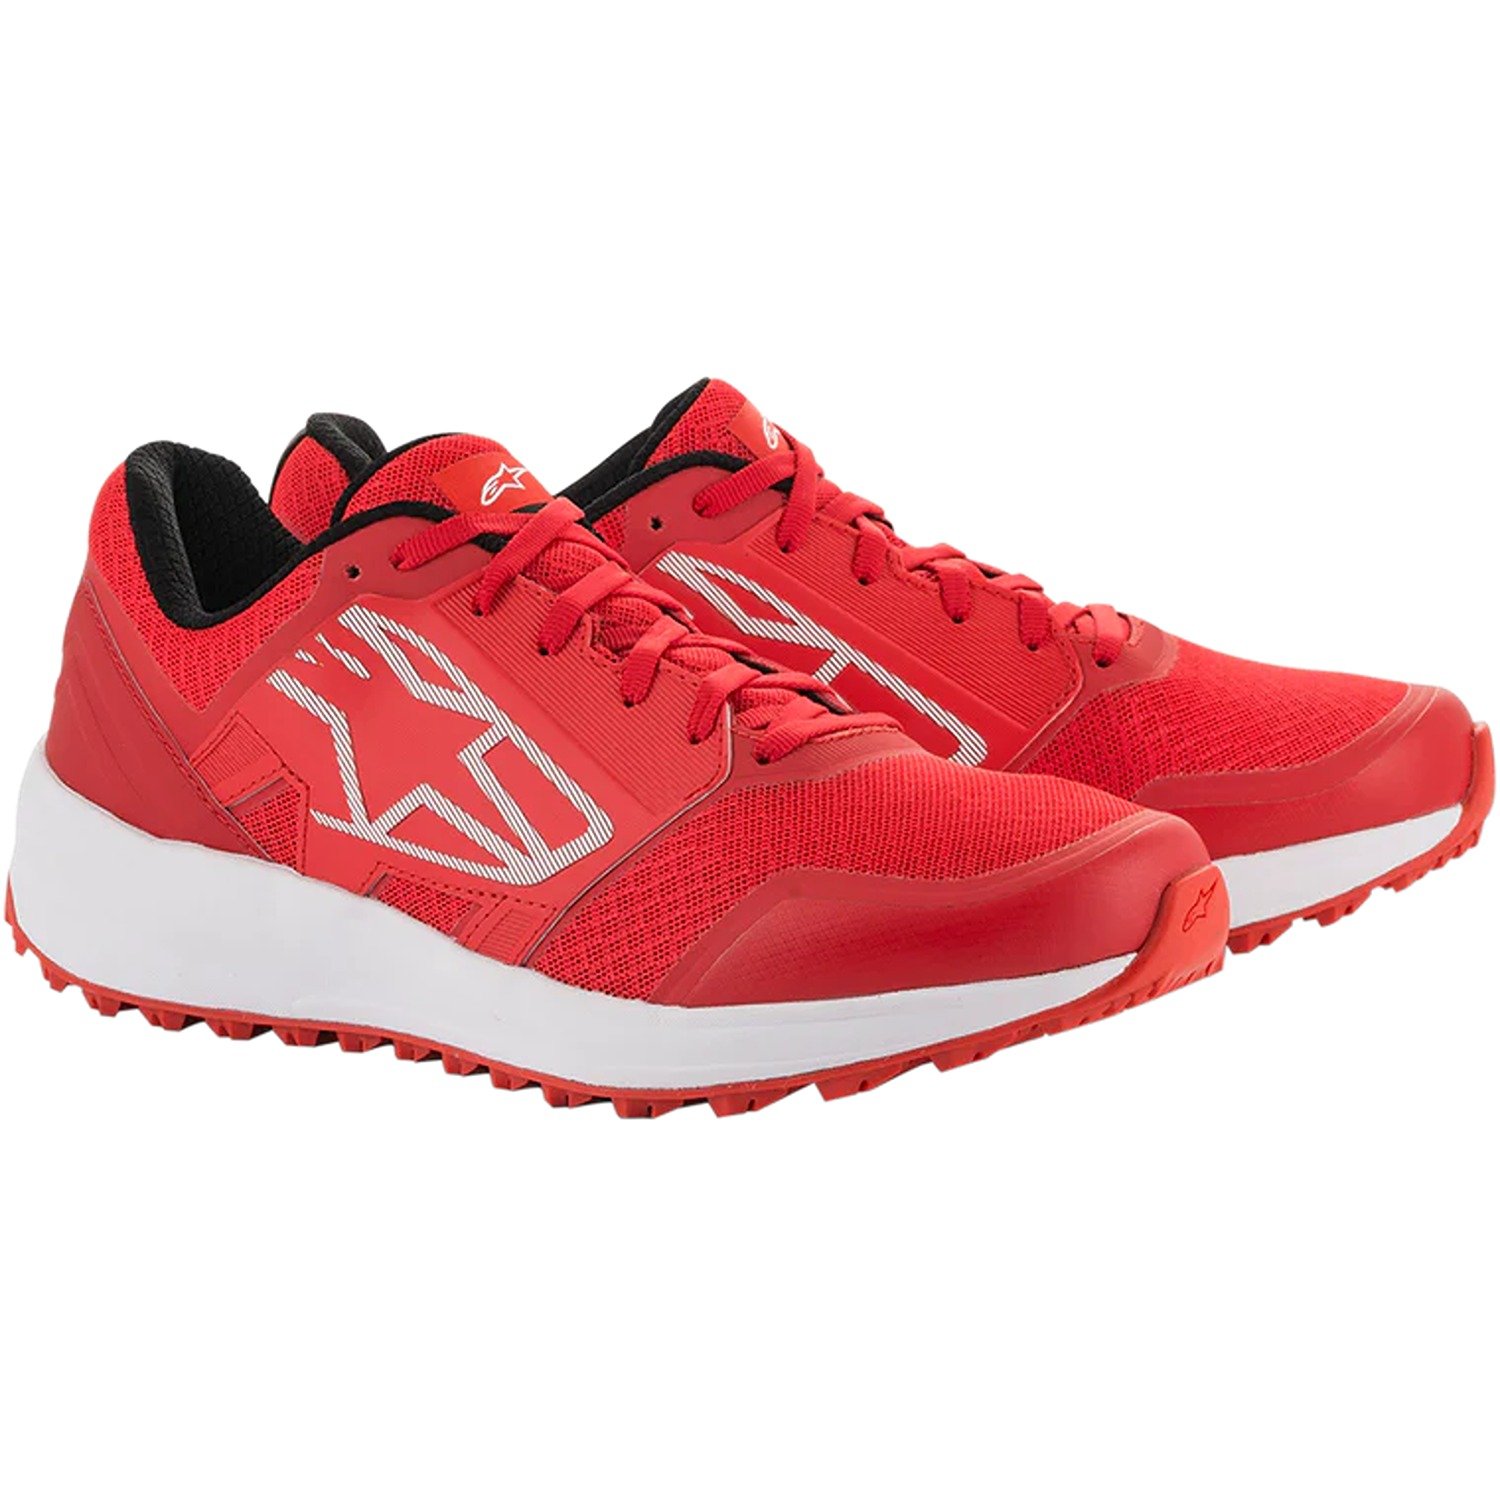 Image of Alpinestars Meta Trail Shoes Red White Taille US 125